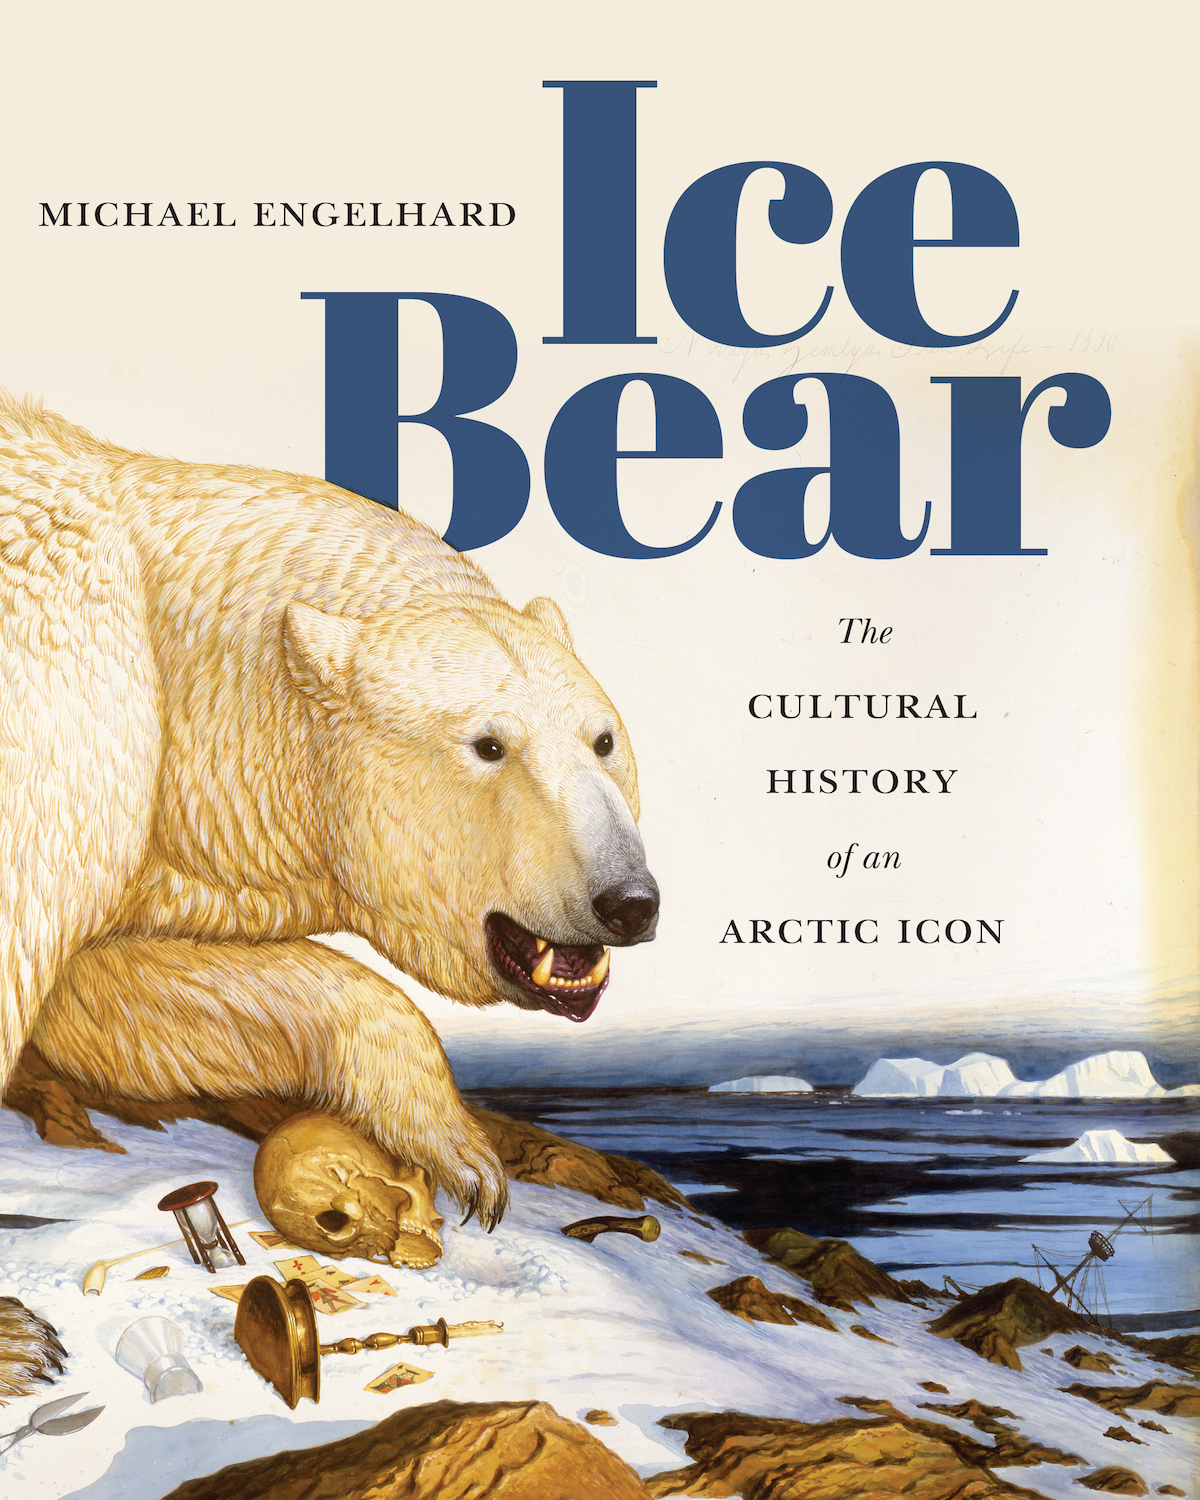 Polar Bear Meat - Arctic Country Foods of the Inuit